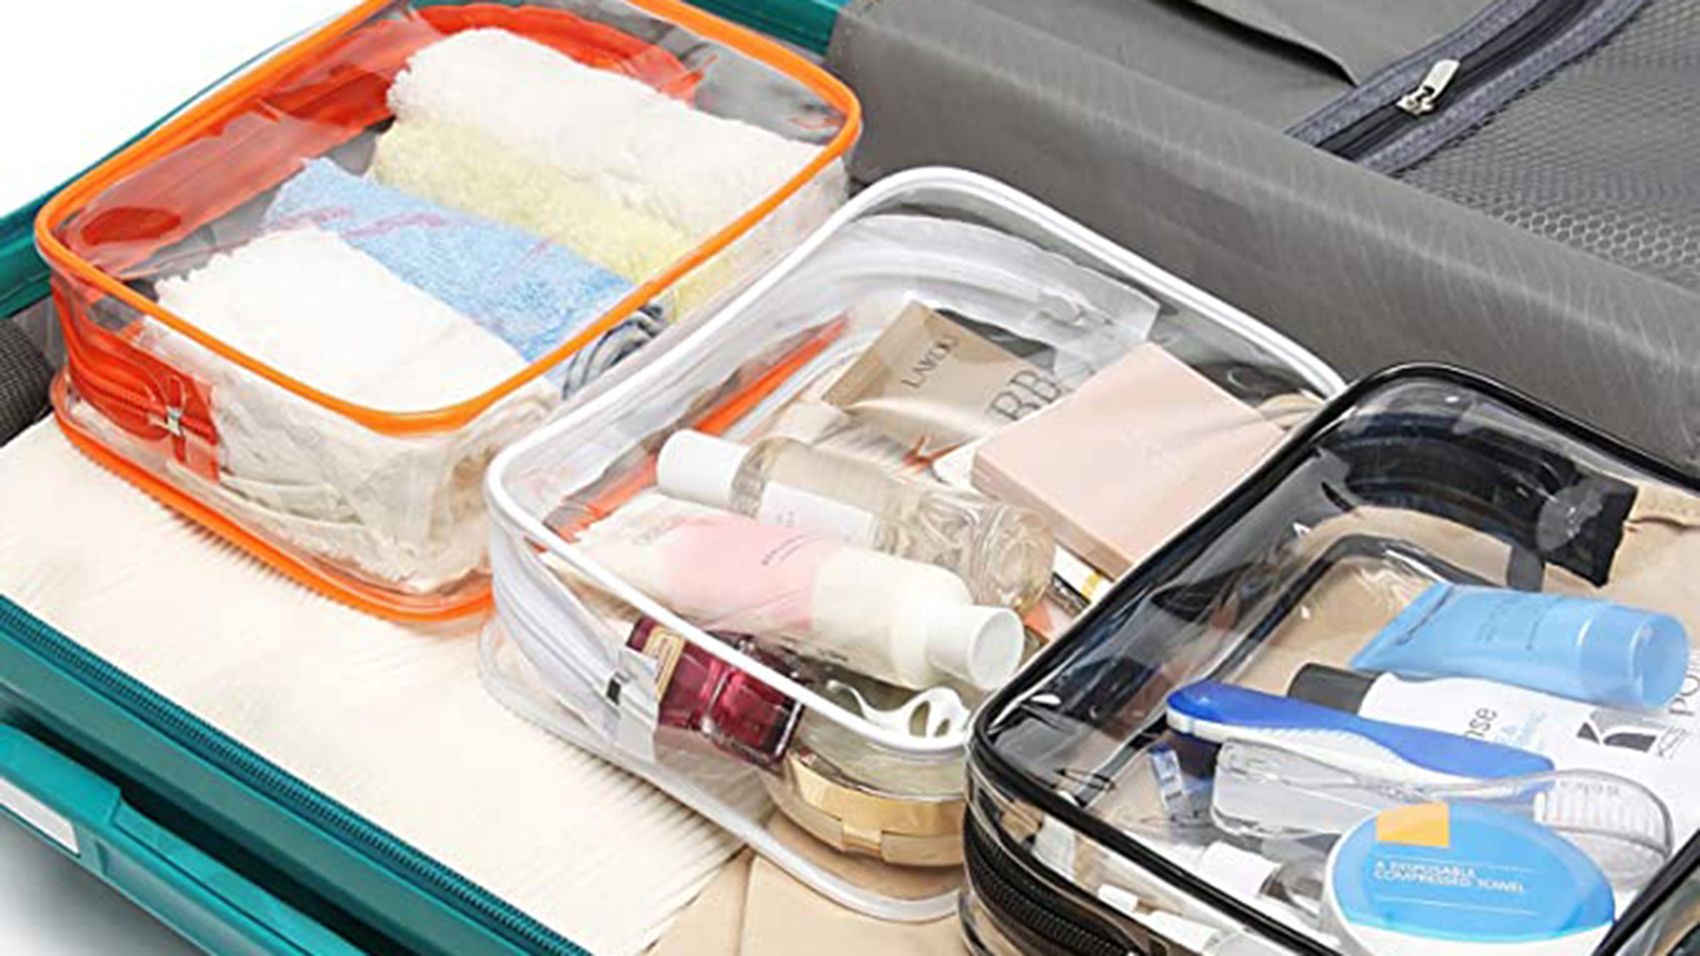 Best Toiletry Bags and Travel Organizers for Your Next Trip